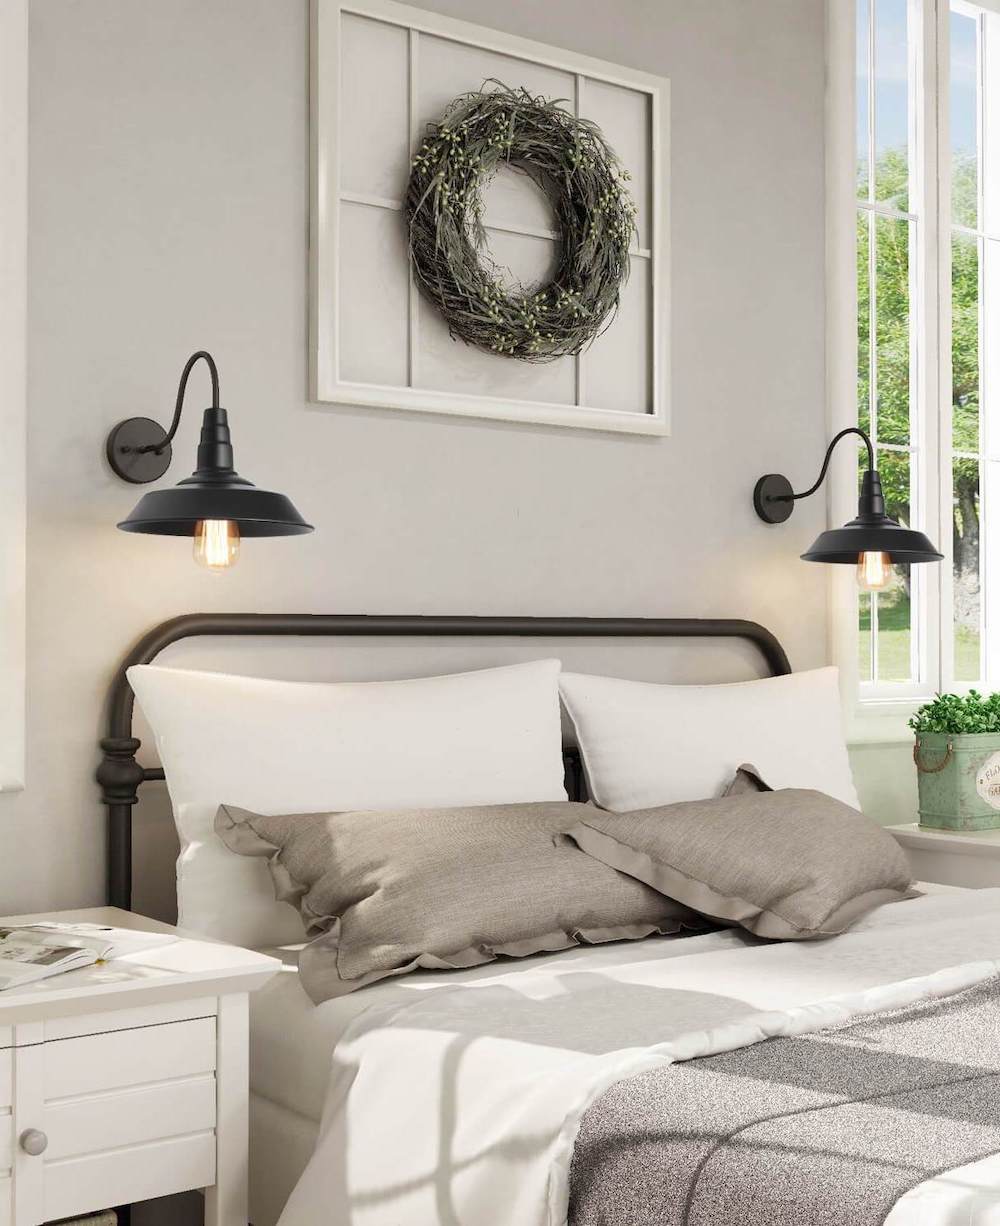 Farmhouse Sconce Lights on the Bedroom Walls